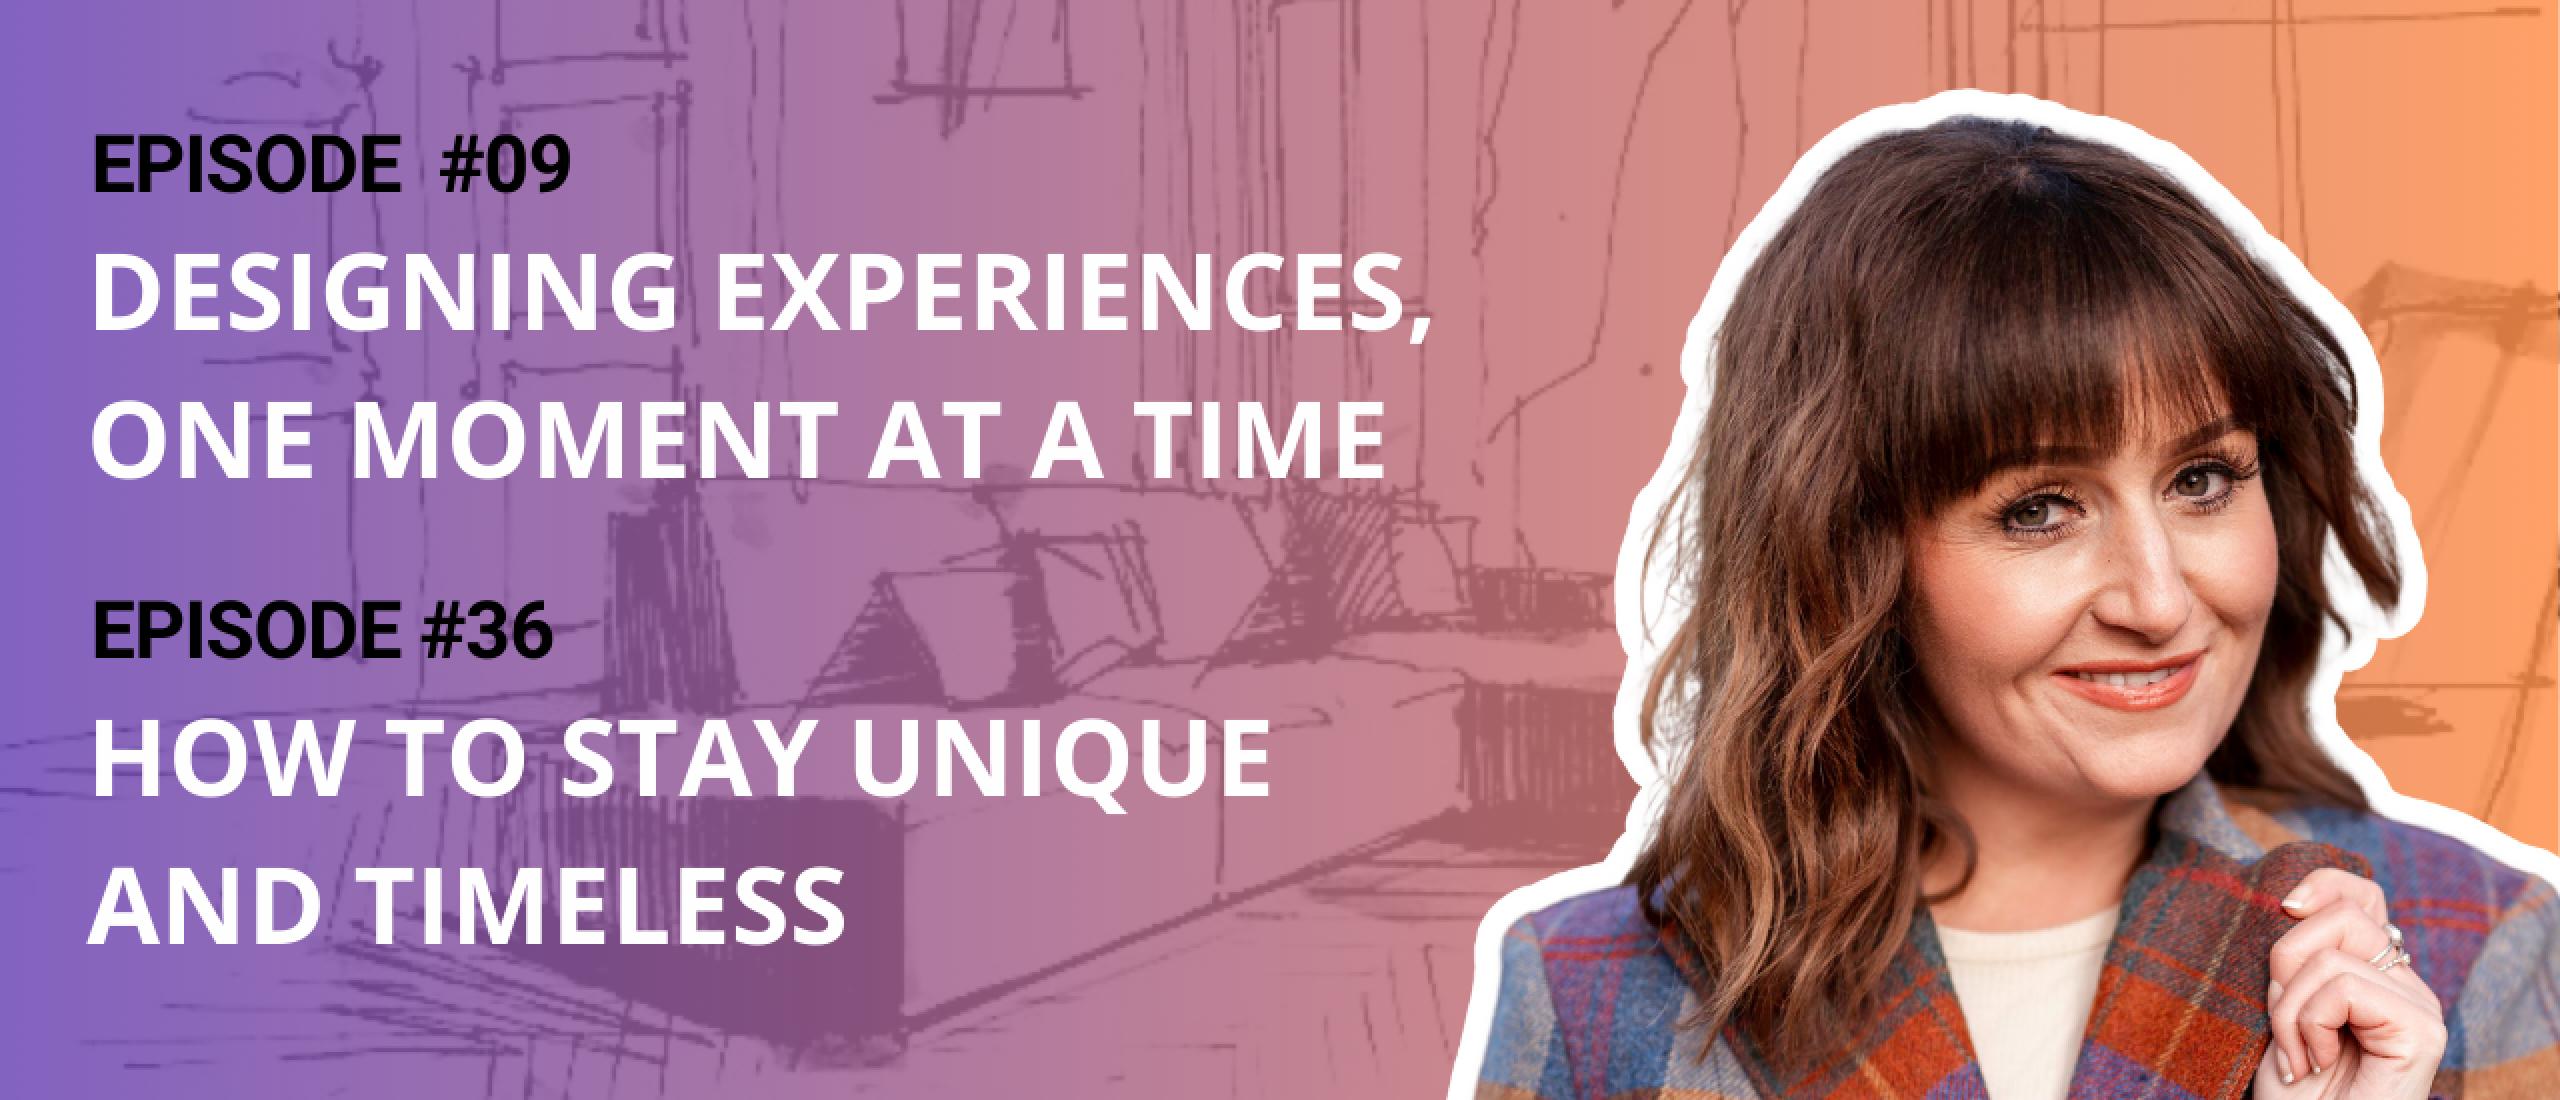 Designing experiences, one moment at a time - with Victoria Taylor